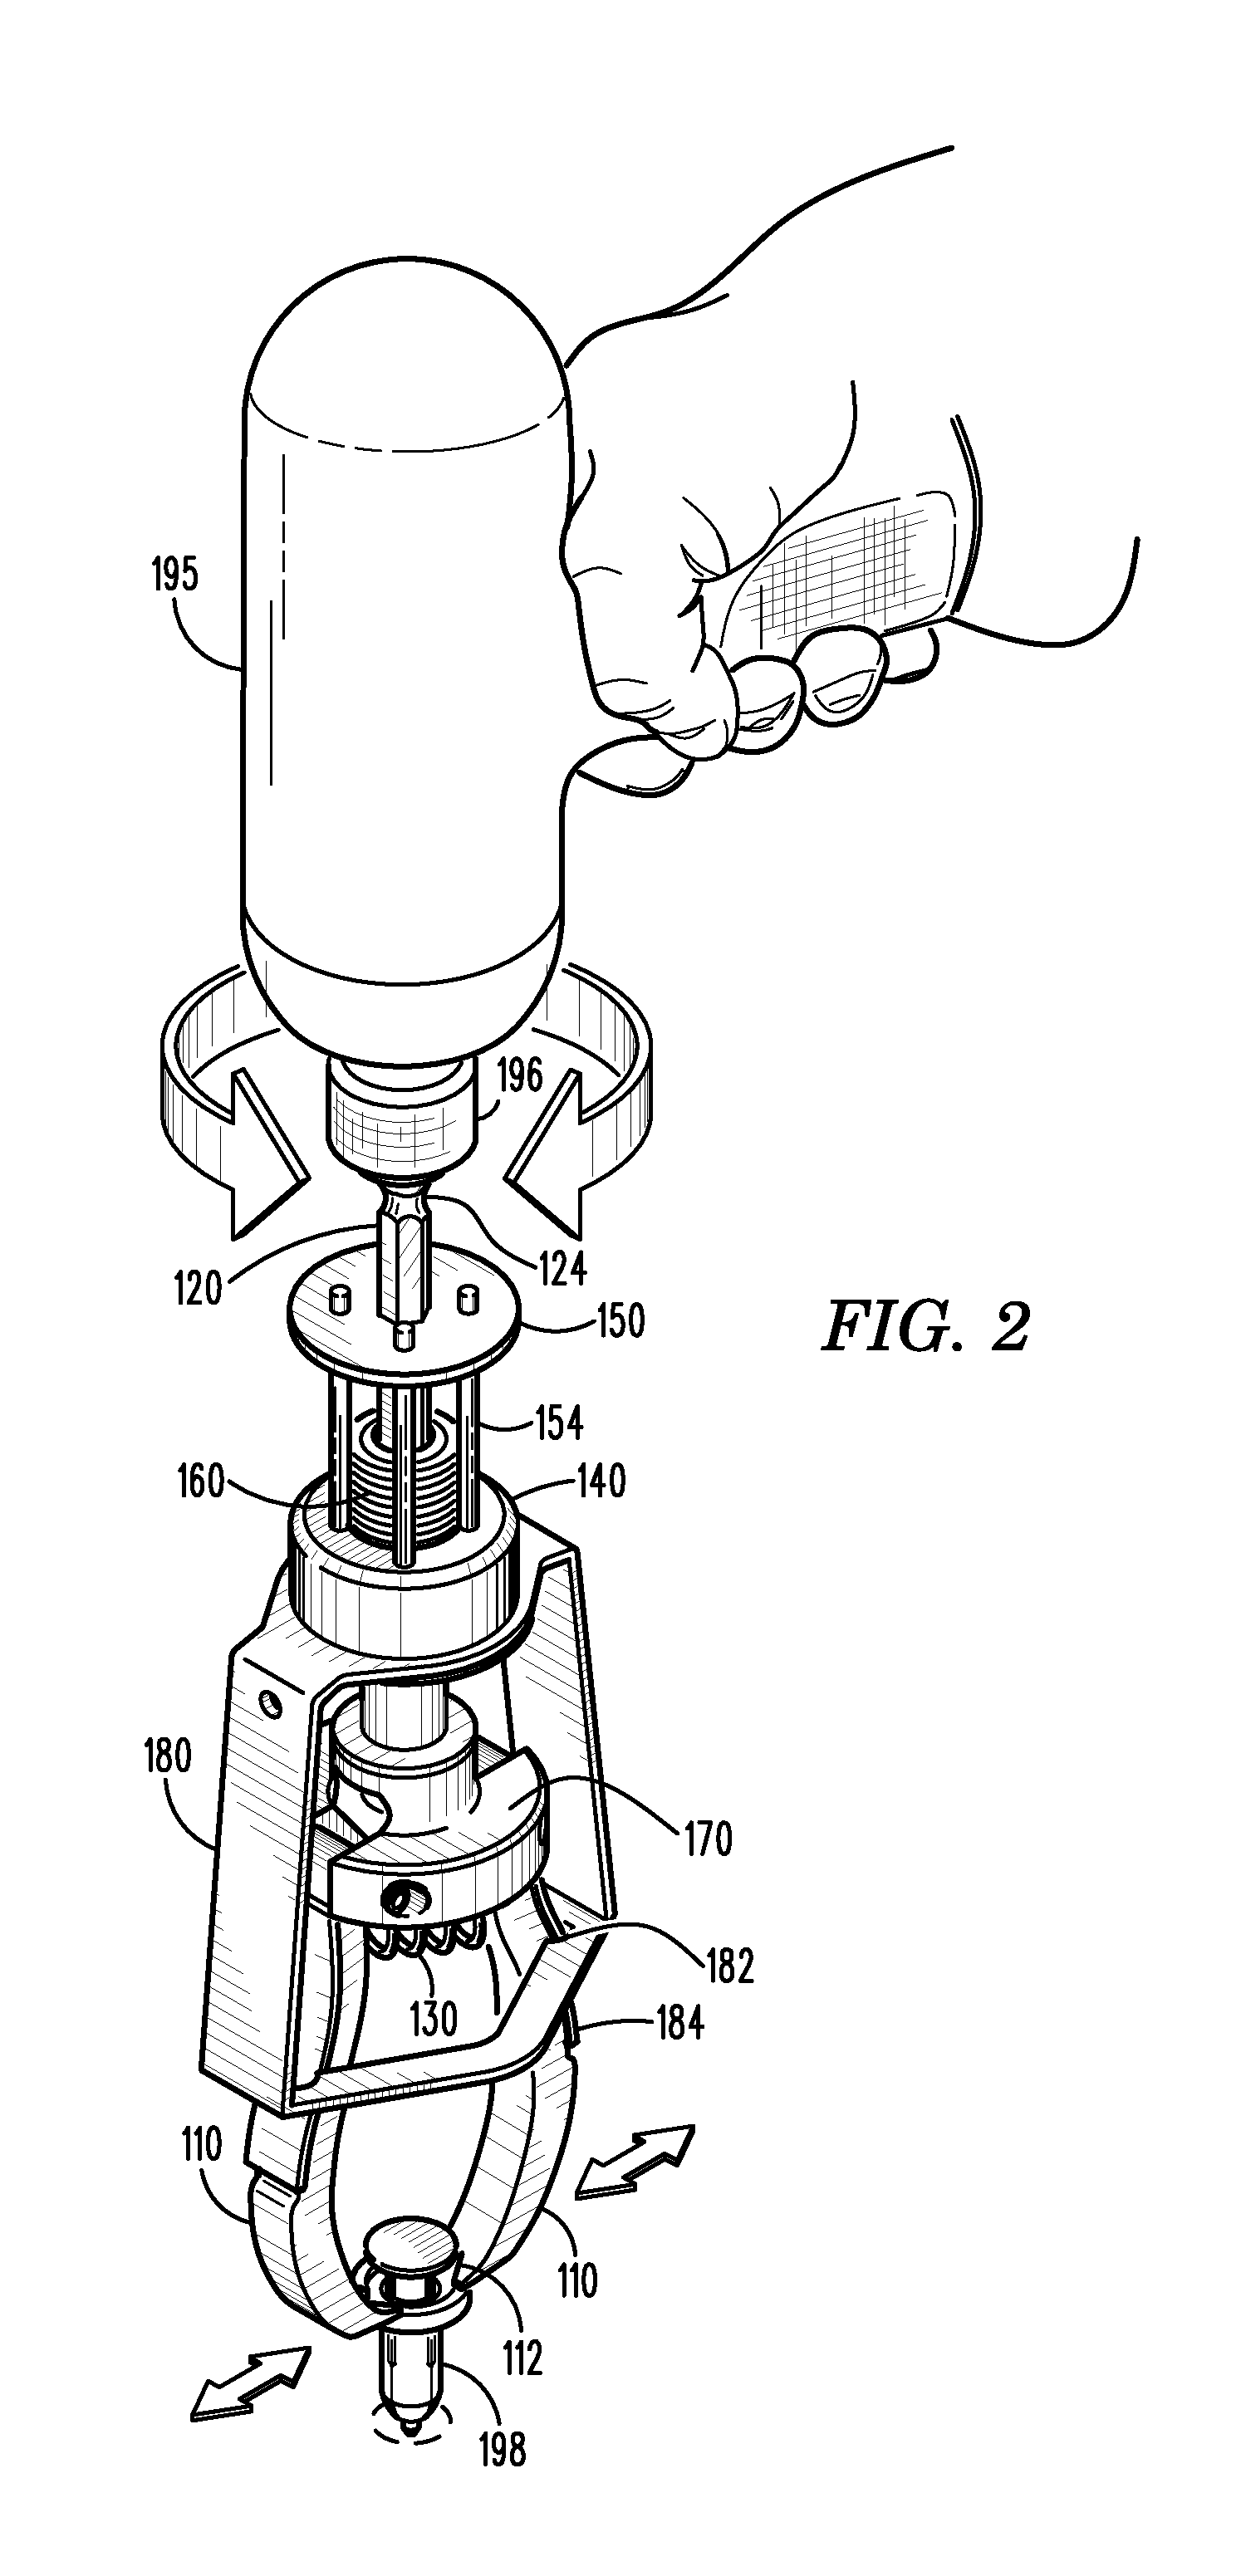 Rotary tool accessory for grabbing